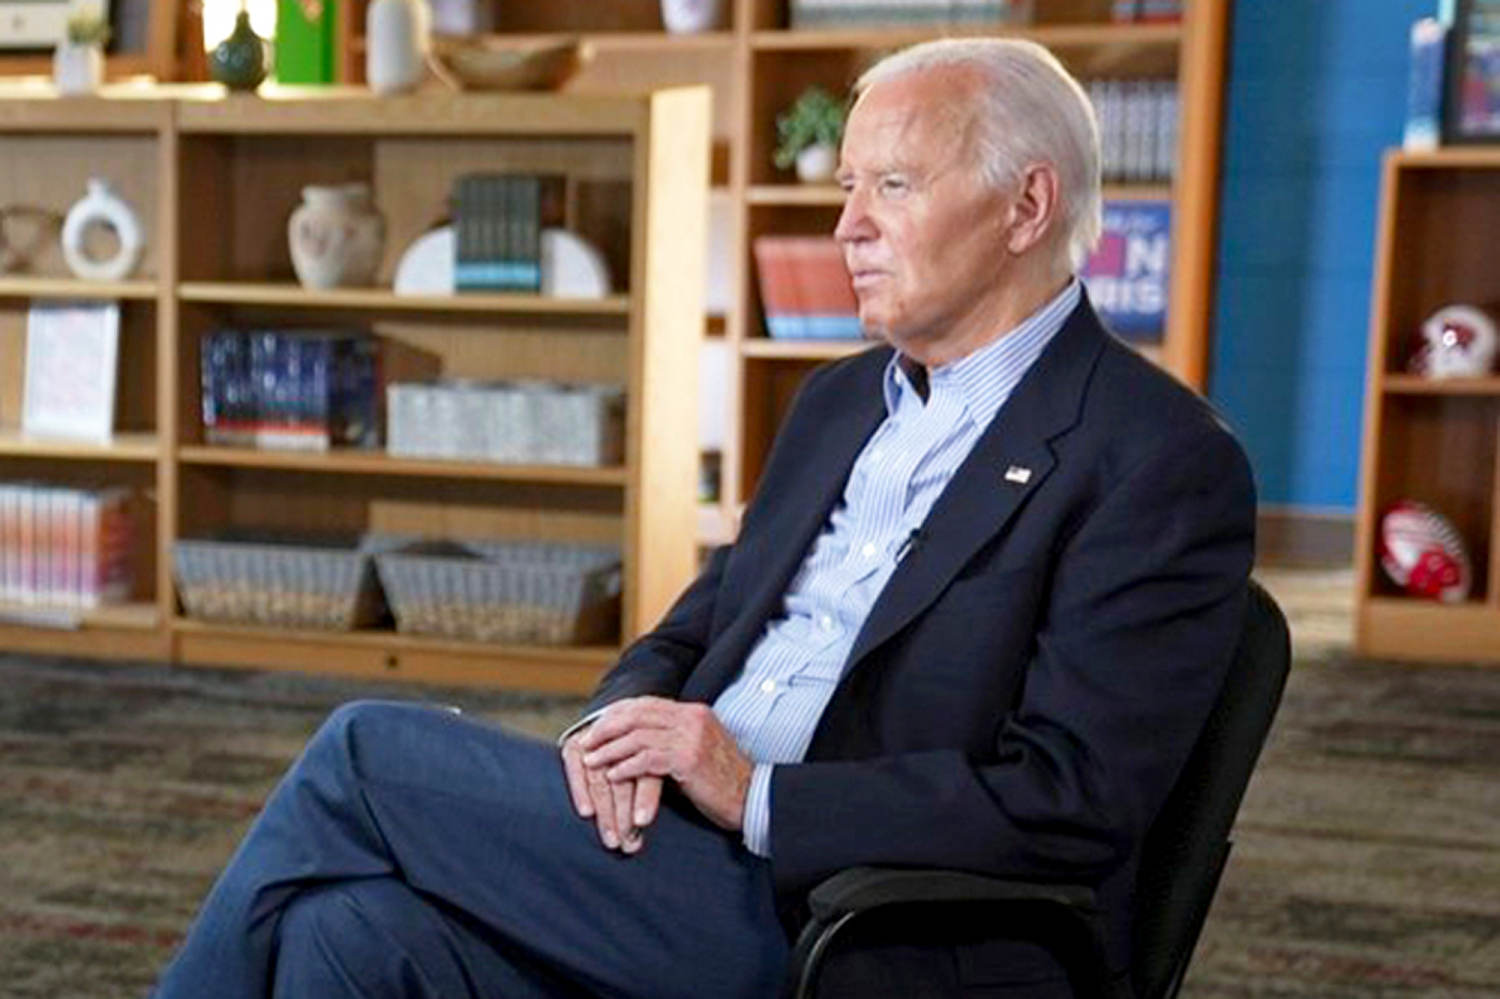 'As long as I gave it my all': Biden reflects on potentially losing to Trump